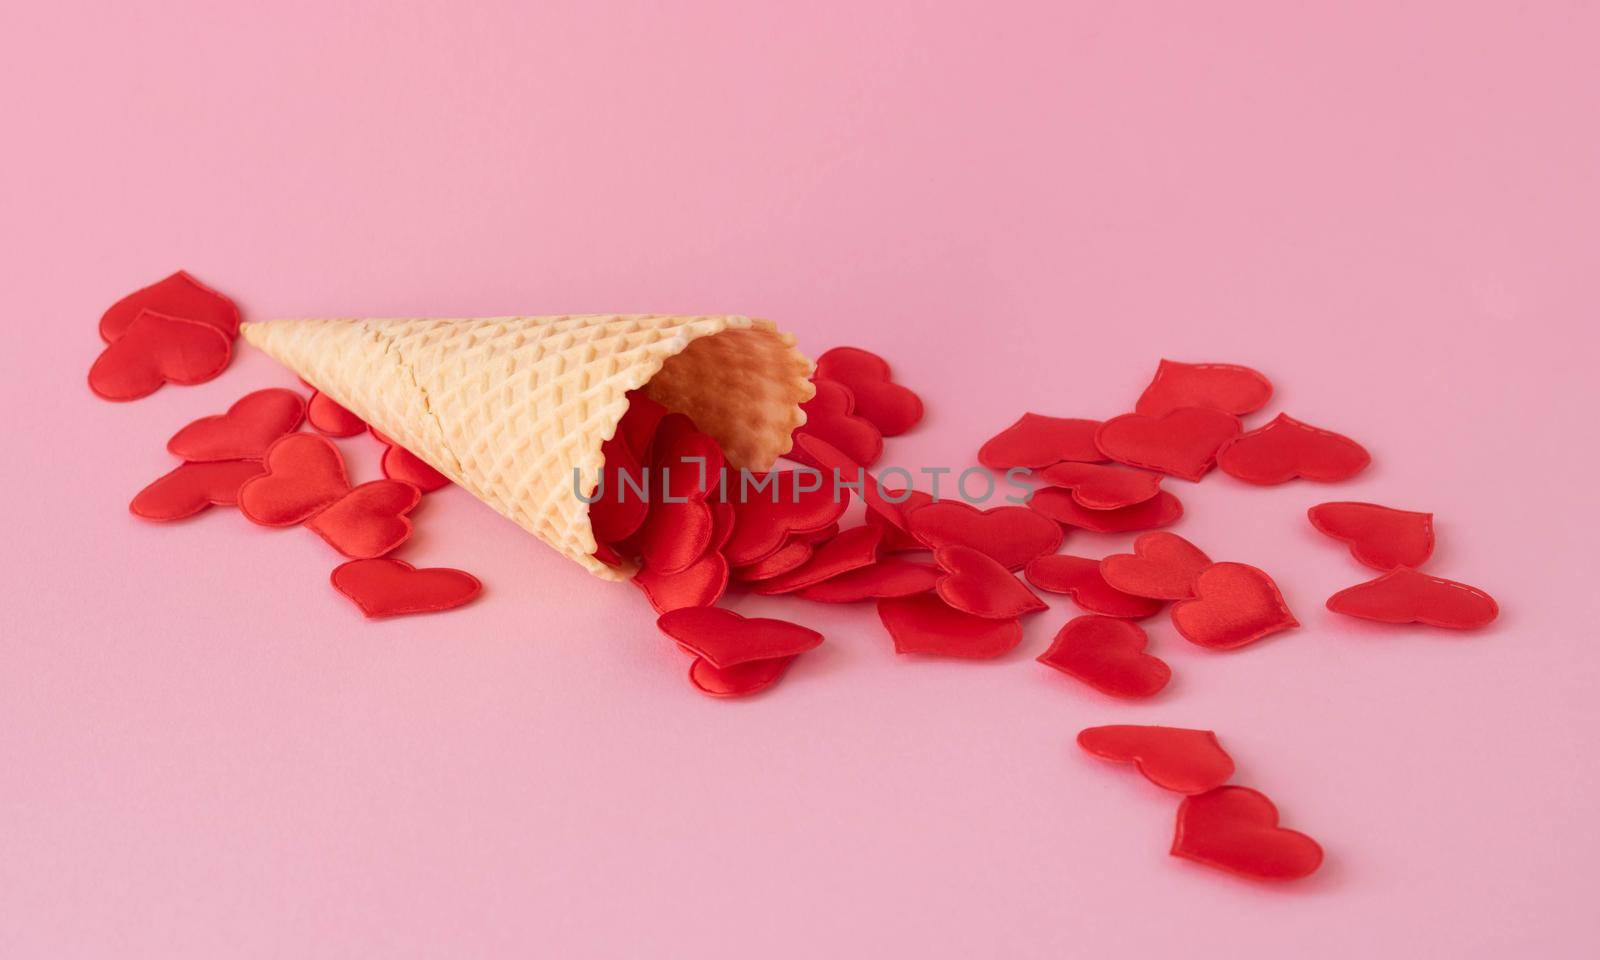 Creative photo of empty waffle cones with scattered red hearts on a pink background. The concept of love, summer, spring.